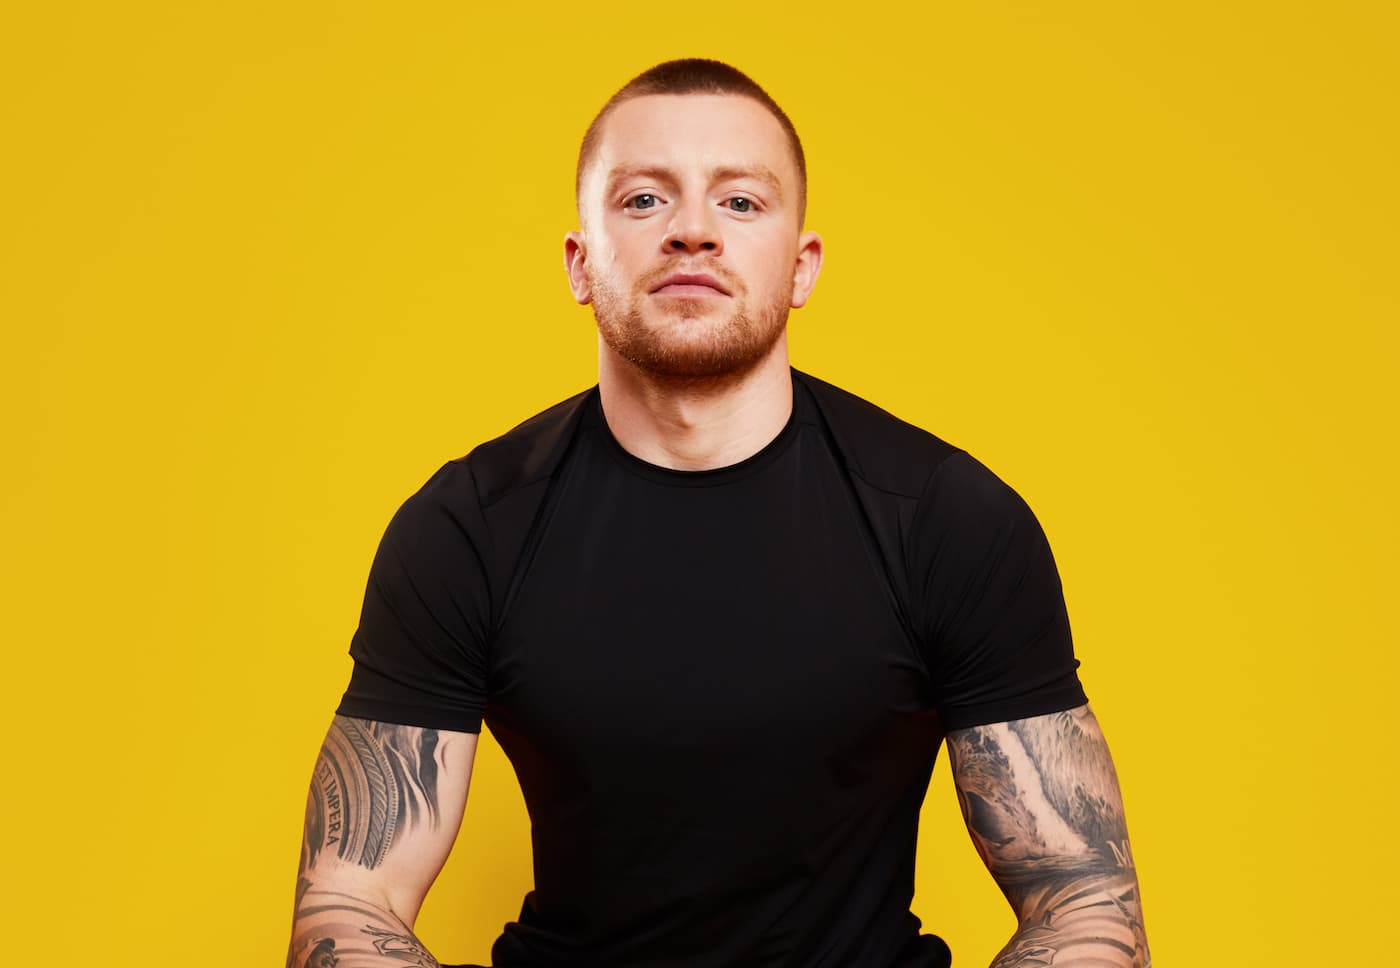 Adam peaty embraces plant-based diet as he takes break from swimming and shares top fitness and nutrition tips